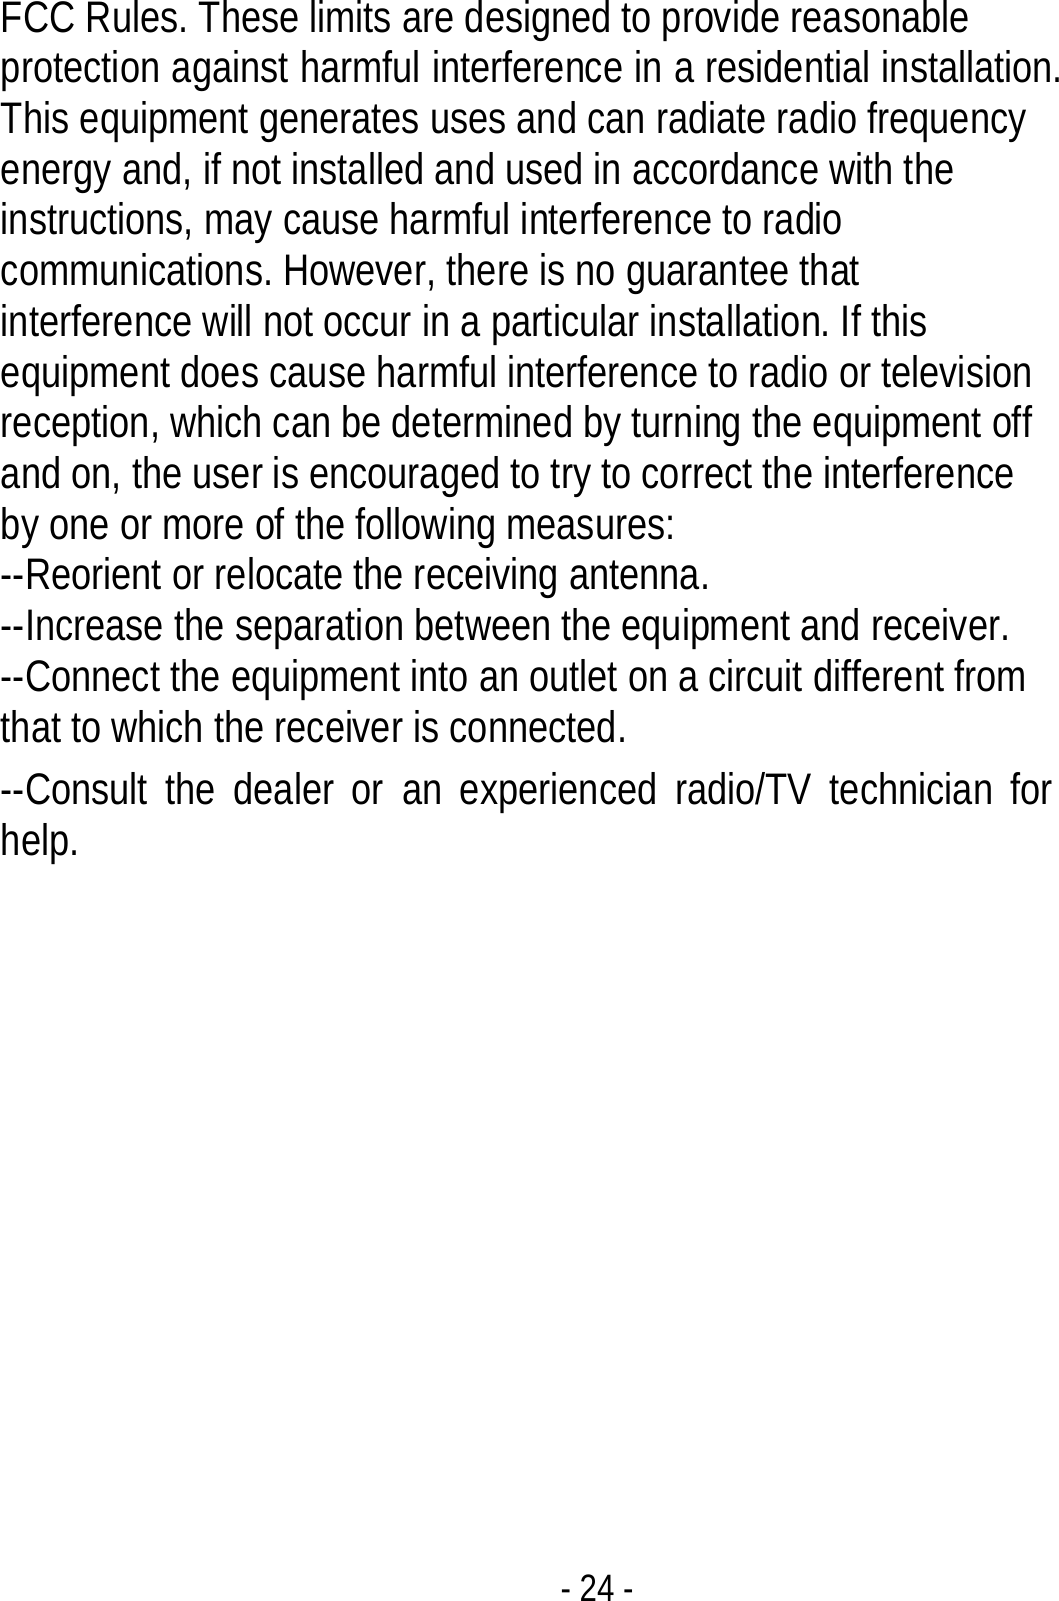 - 24 - FCC Rules. These limits are designed to provide reasonable protection against harmful interference in a residential installation. This equipment generates uses and can radiate radio frequency energy and, if not installed and used in accordance with the instructions, may cause harmful interference to radio communications. However, there is no guarantee that interference will not occur in a particular installation. If this equipment does cause harmful interference to radio or television reception, which can be determined by turning the equipment off and on, the user is encouraged to try to correct the interference by one or more of the following measures:       --Reorient or relocate the receiving antenna.   --Increase the separation between the equipment and receiver.     --Connect the equipment into an outlet on a circuit different from that to which the receiver is connected.     --Consult the dealer or an experienced radio/TV technician for help. 